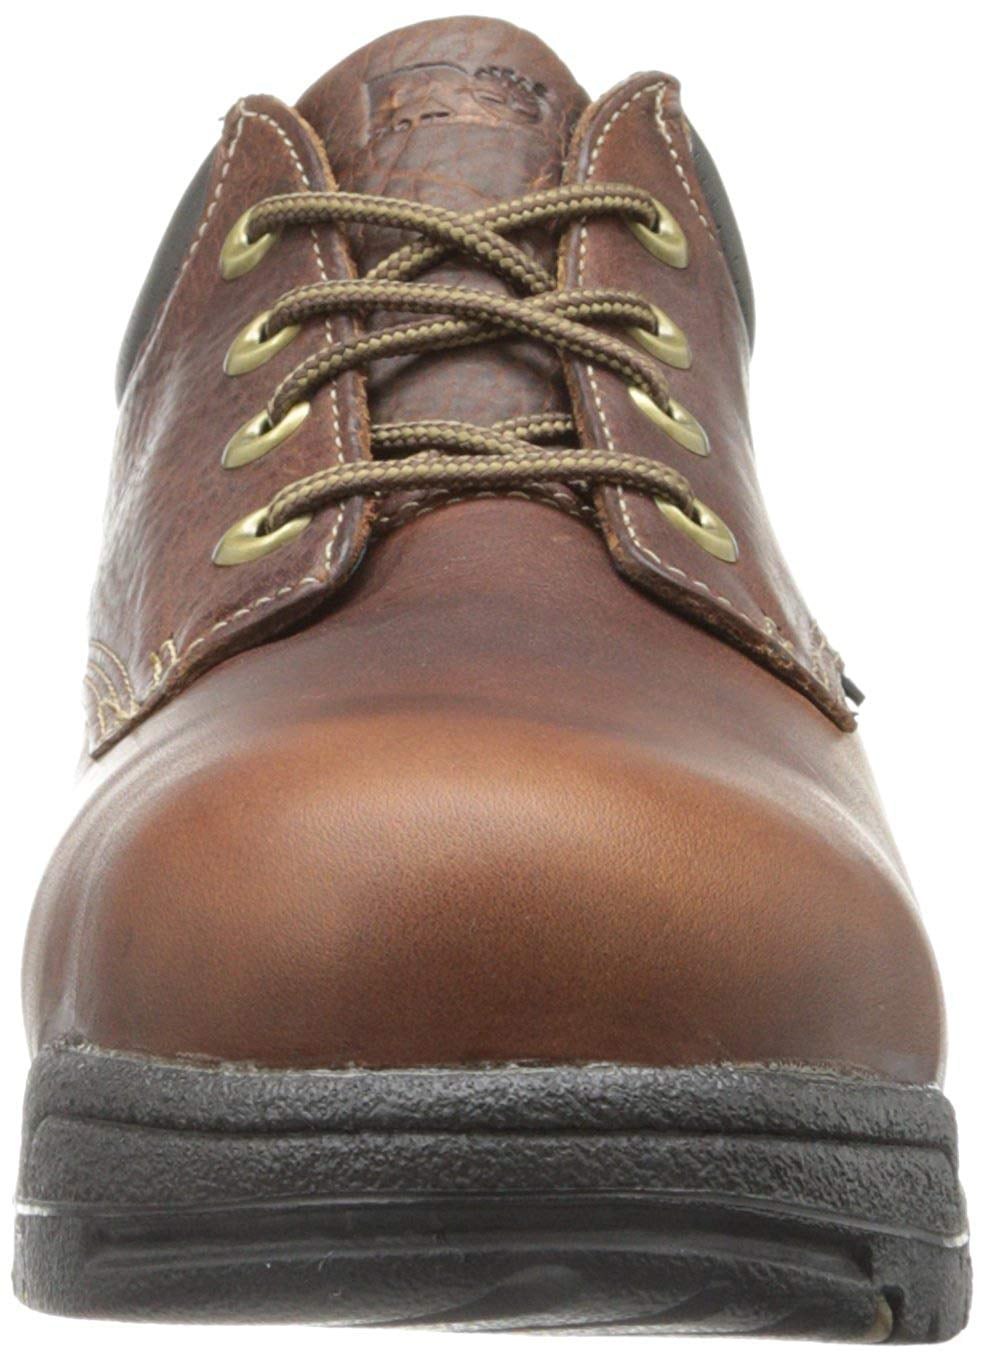 timberland boots titan safety toe